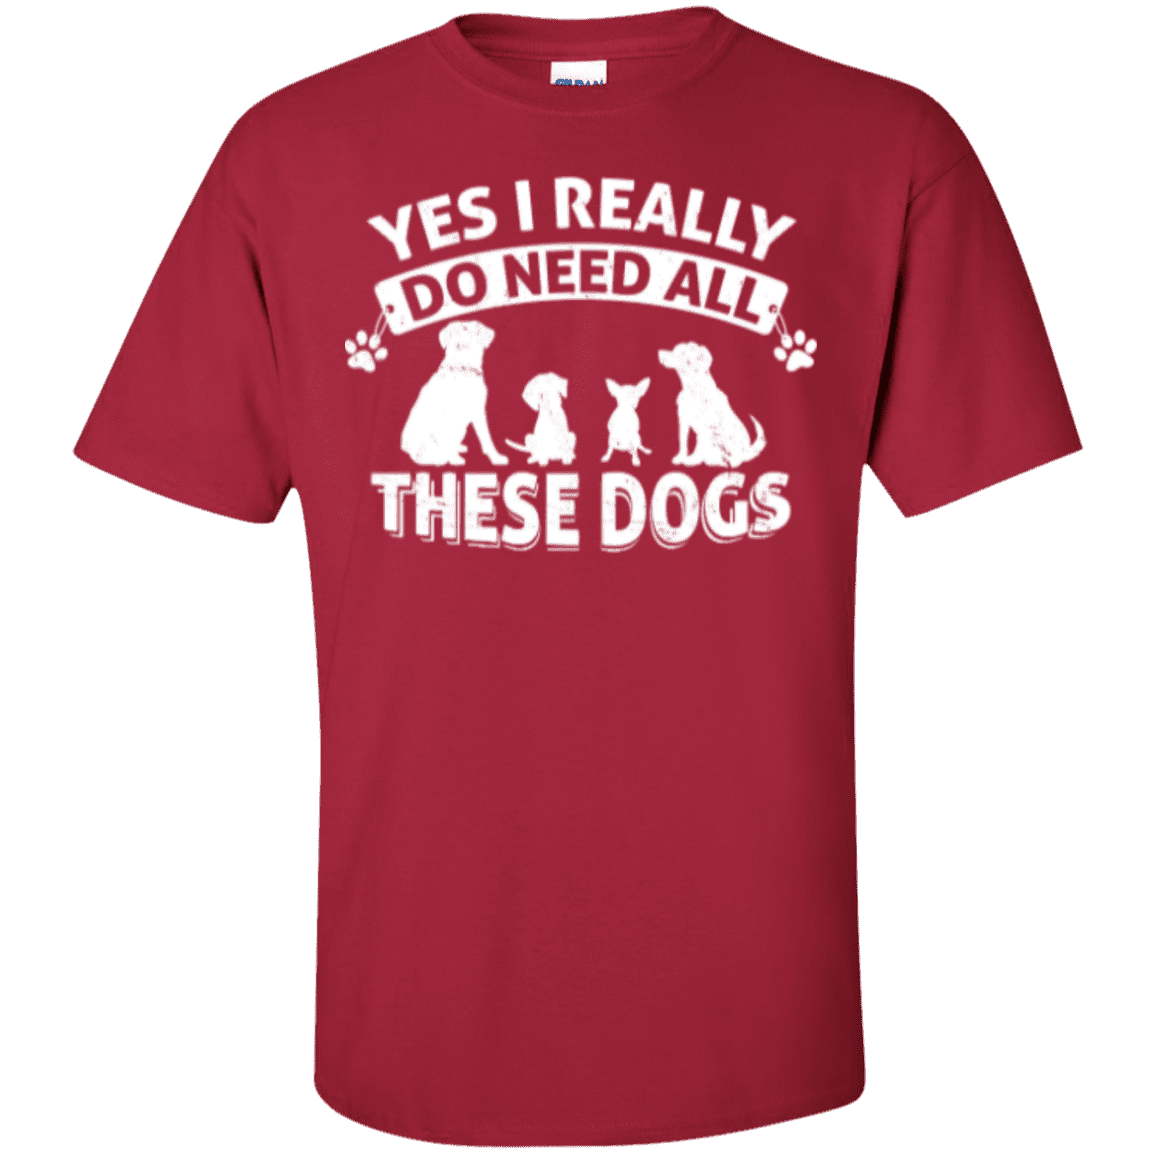 Yes I Need All These Dogs - T Shirt – Rescuers Club